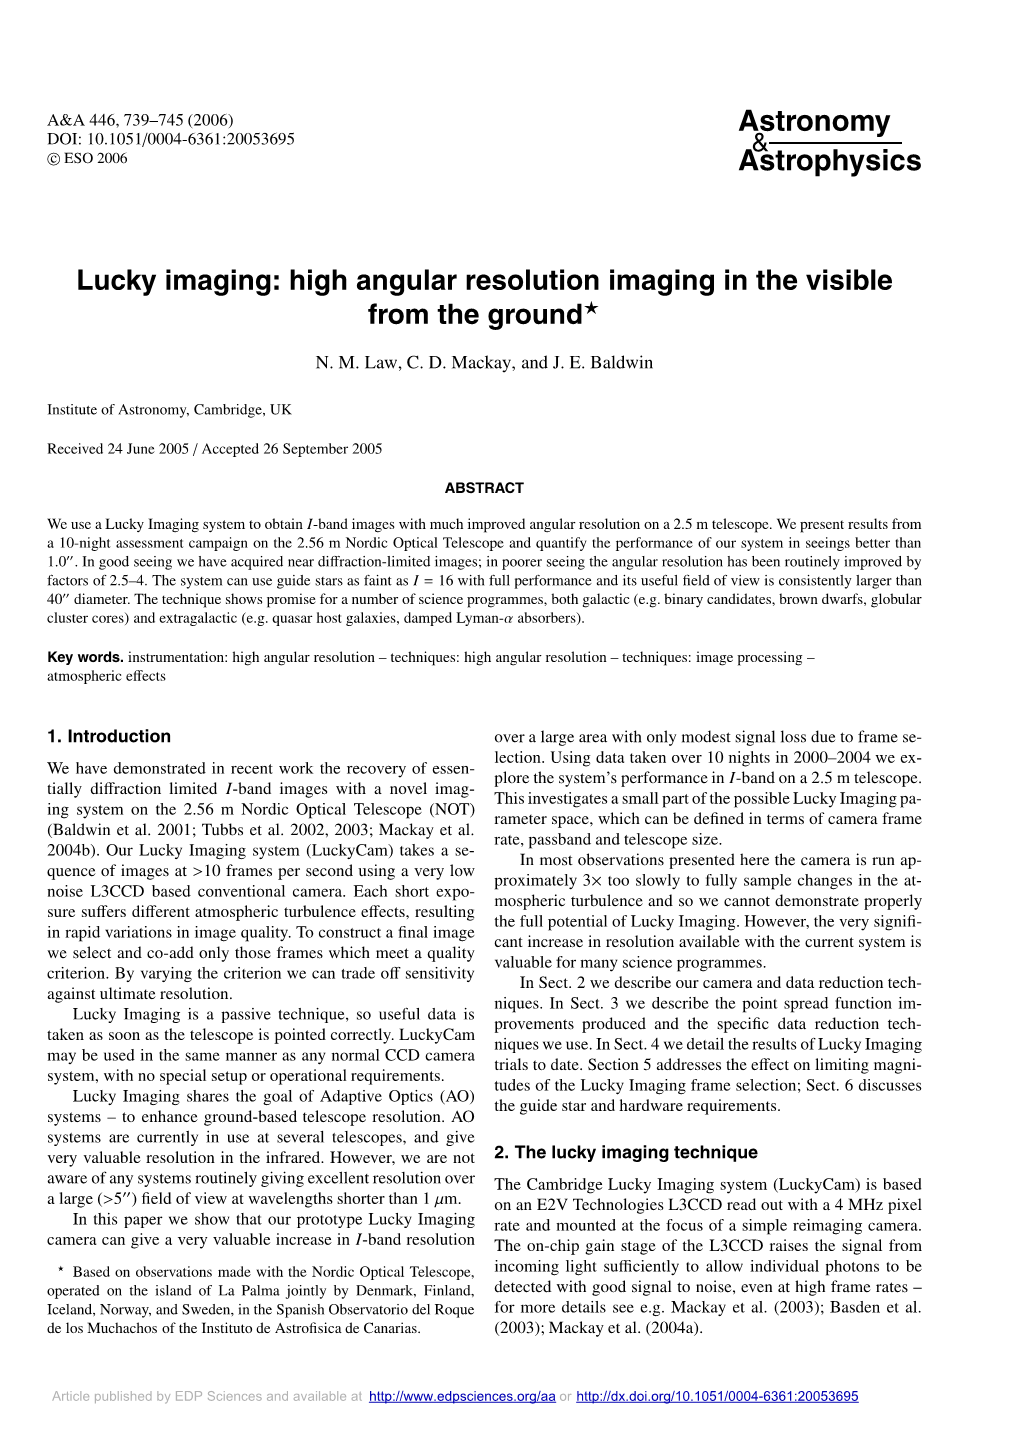 Lucky Imaging: High Angular Resolution Imaging in the Visible from the Ground